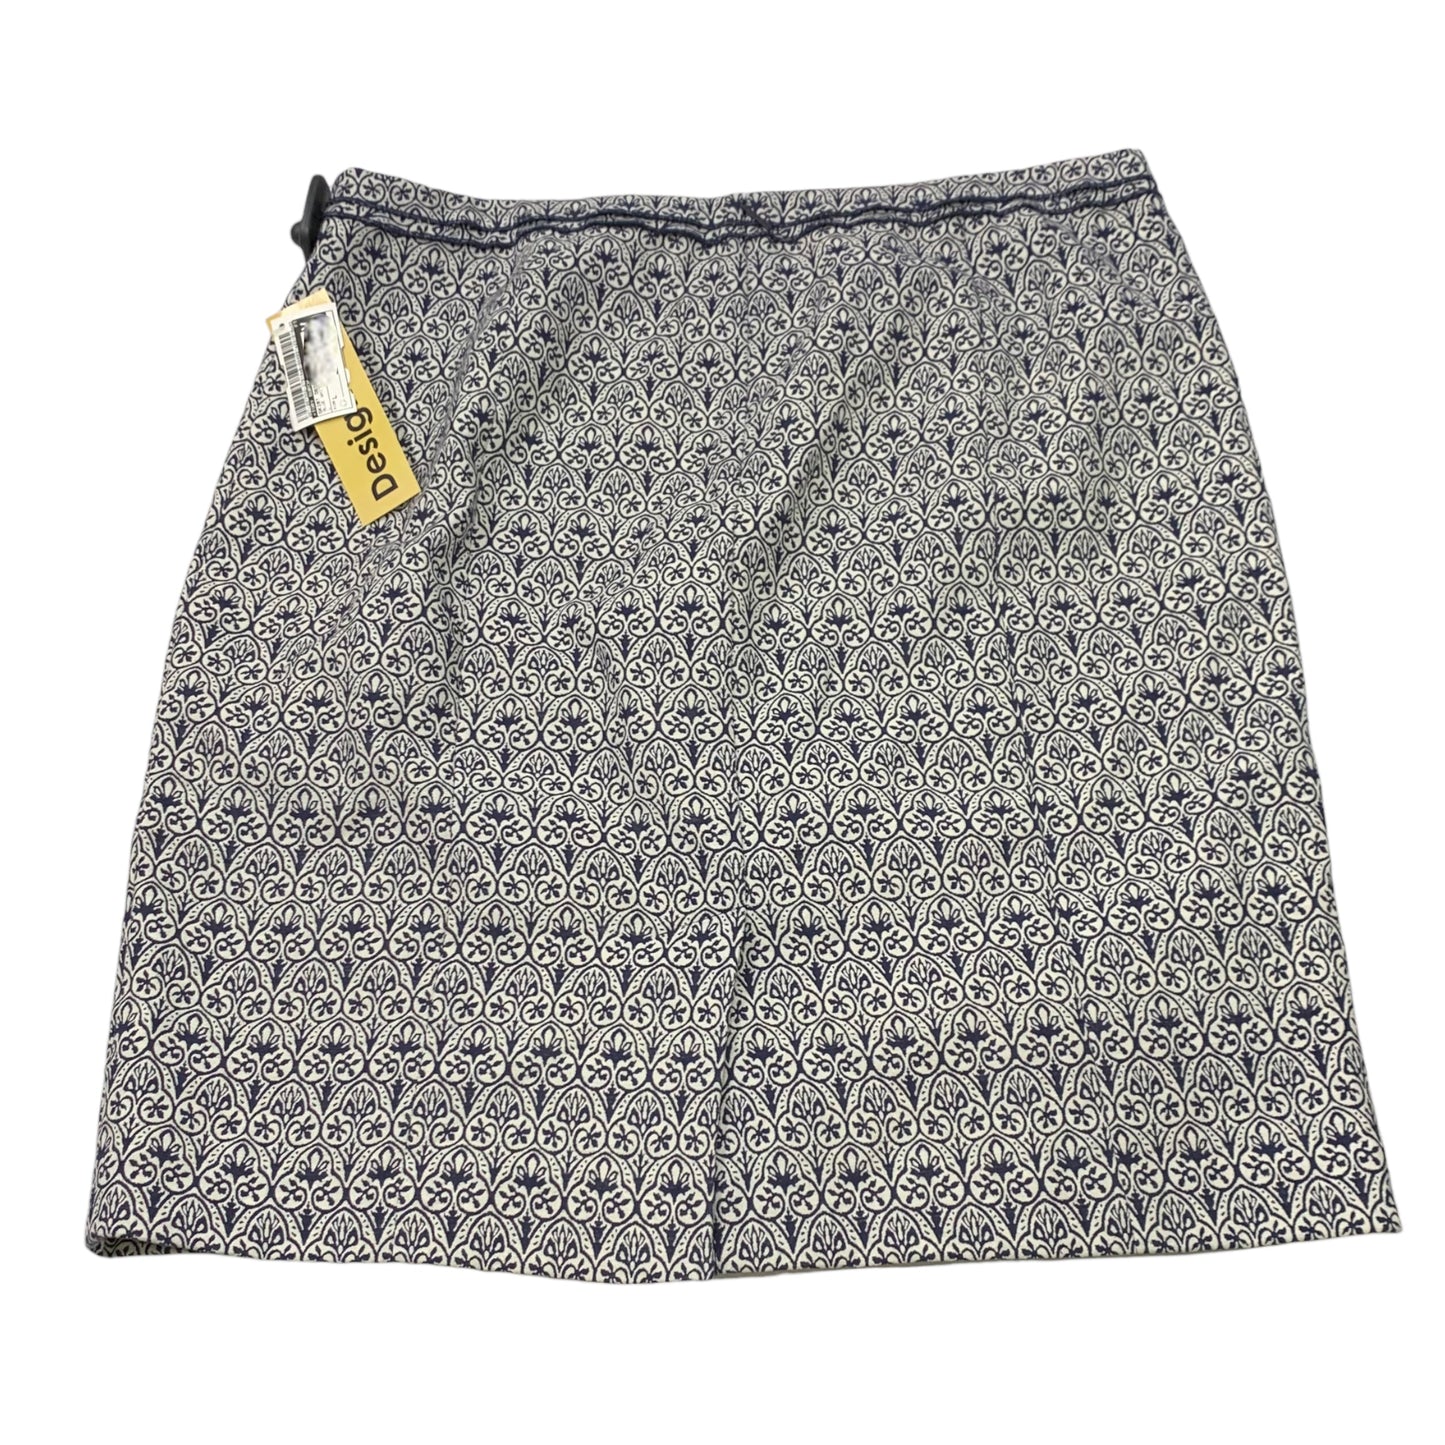 Skirt Designer By Tory Burch  Size: L